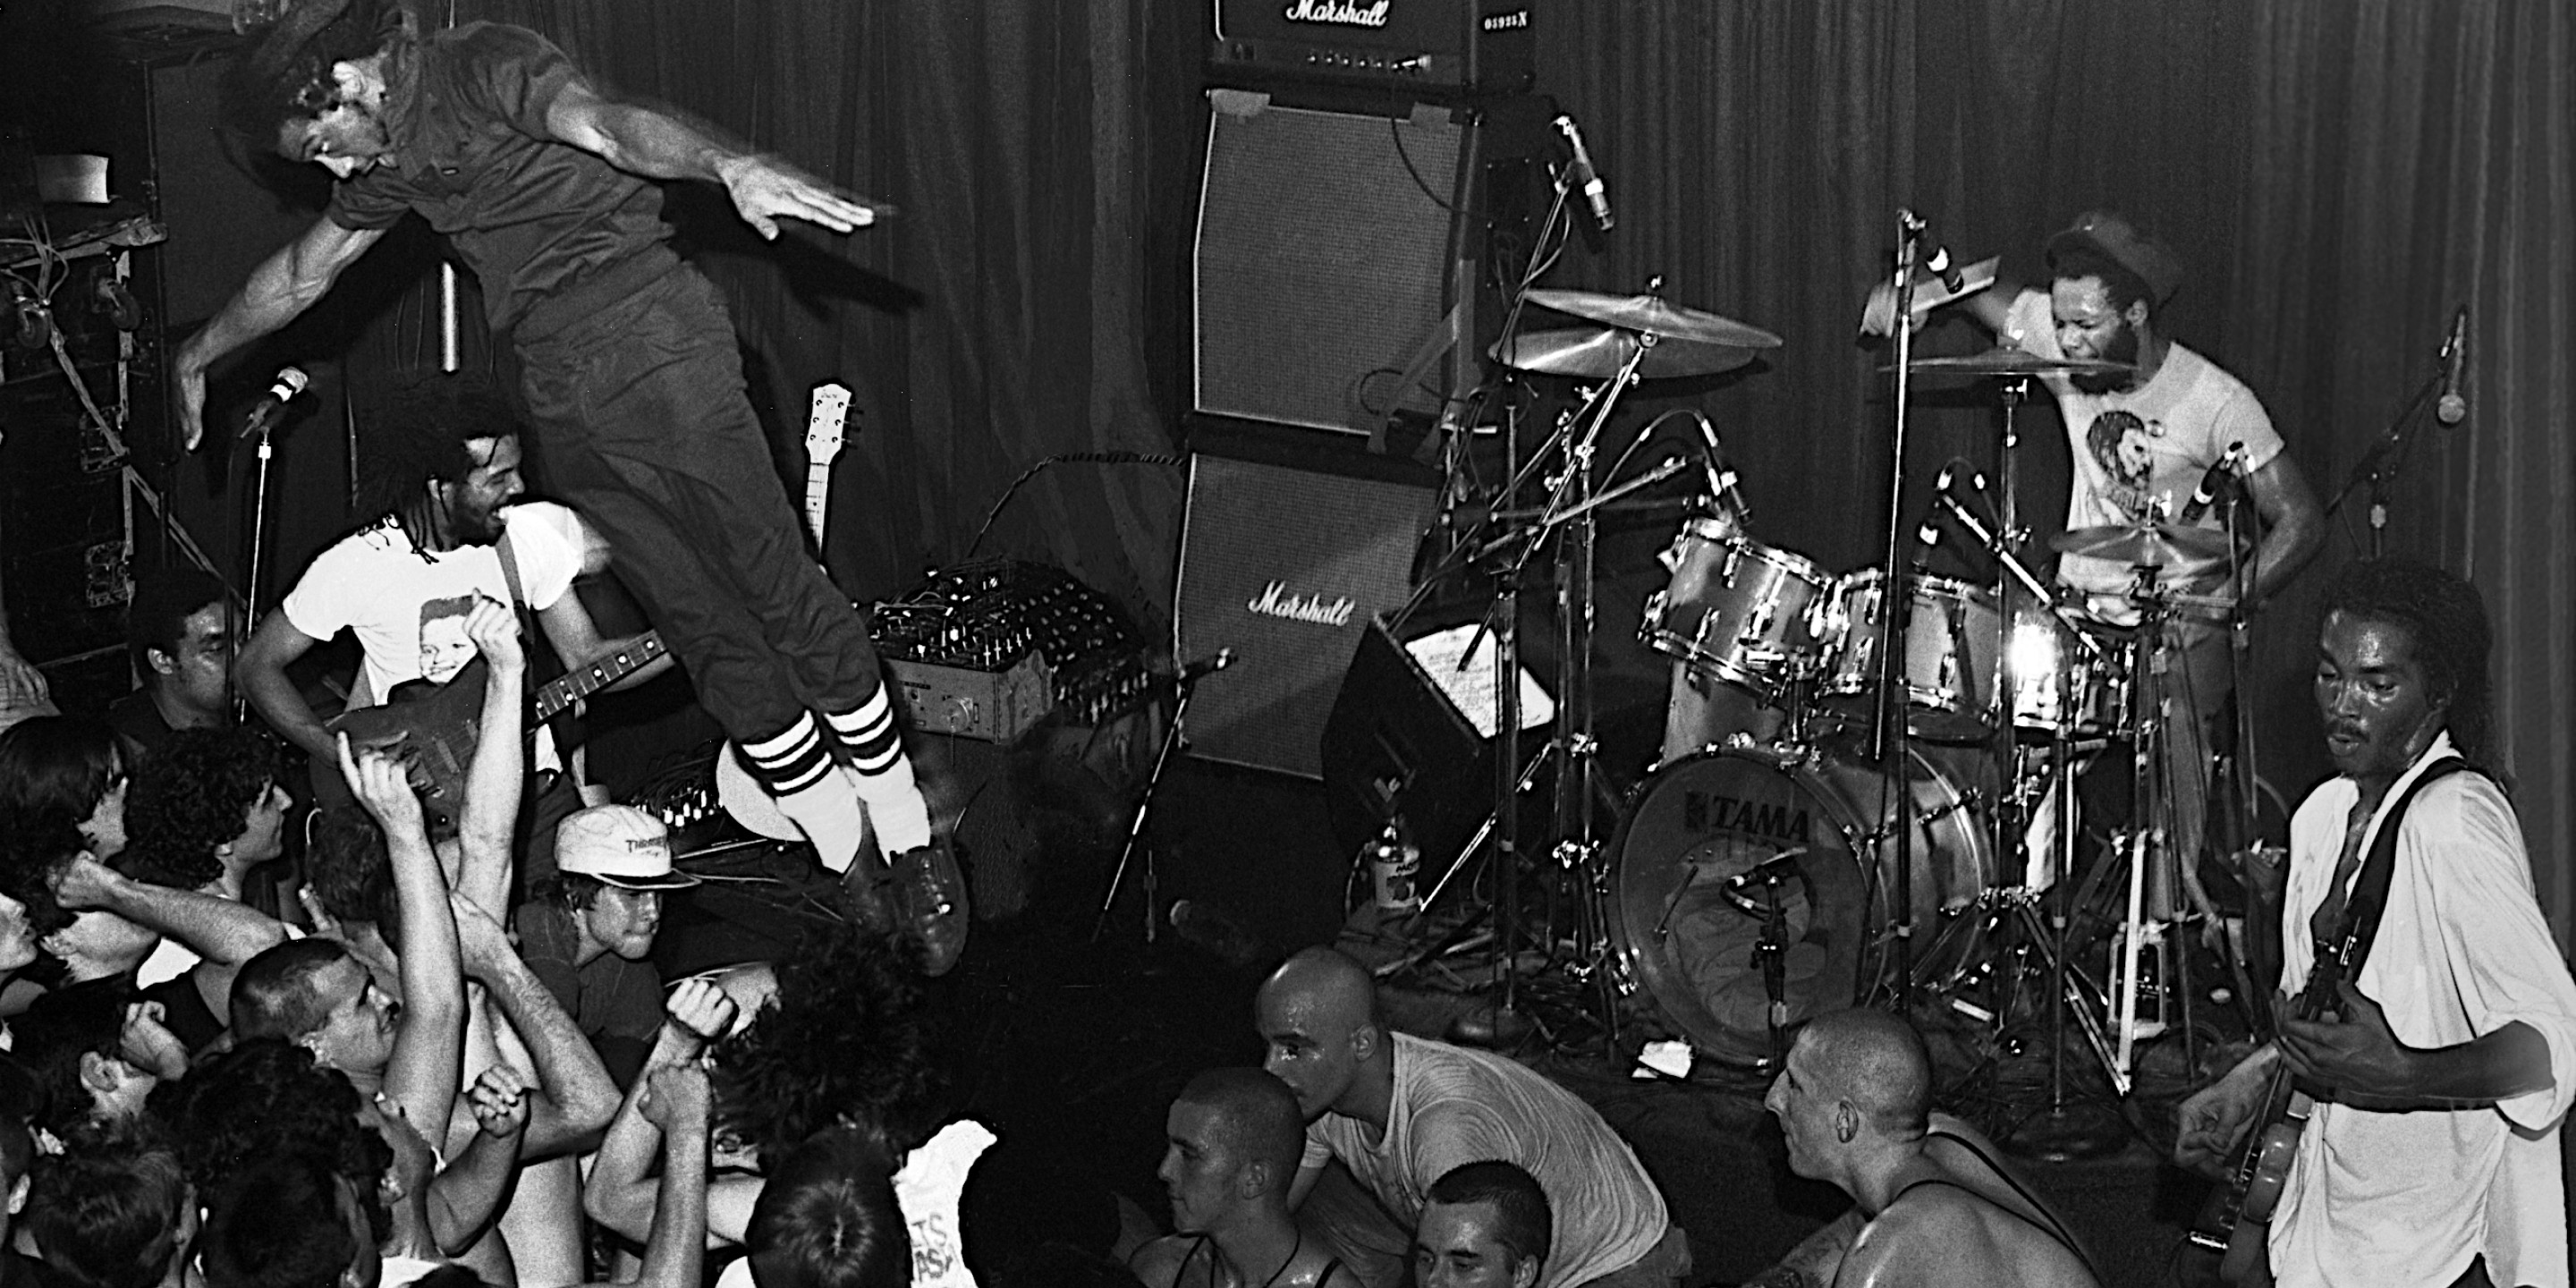 Black and white photo of a musician jumping in the crowd with Marshall amplifiers in the stage.